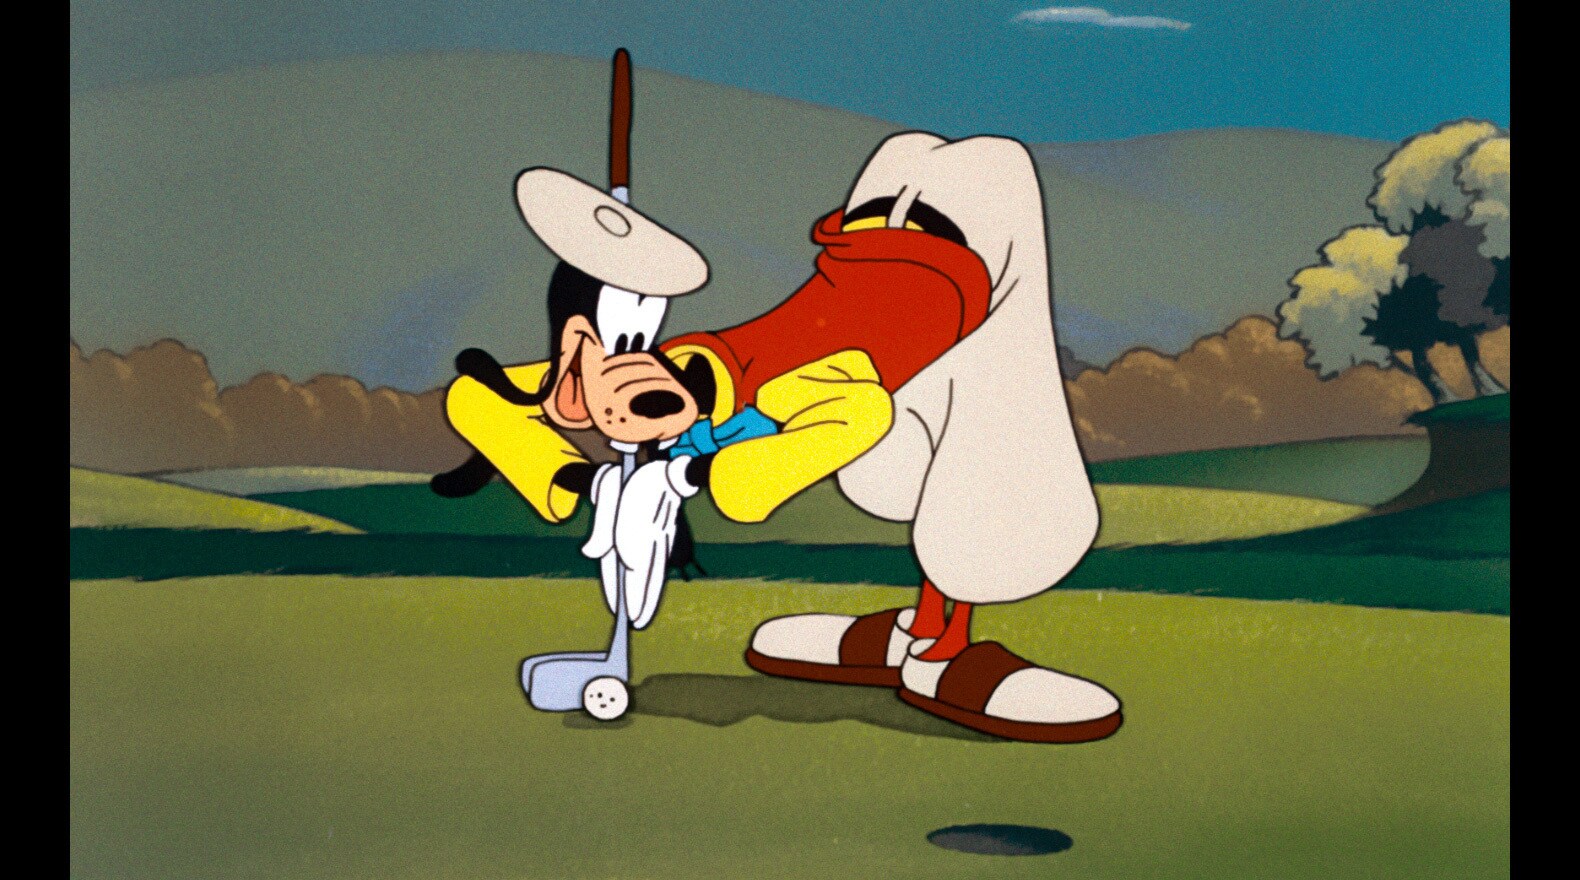 Goofy gives everyone a lesson on the fairway.